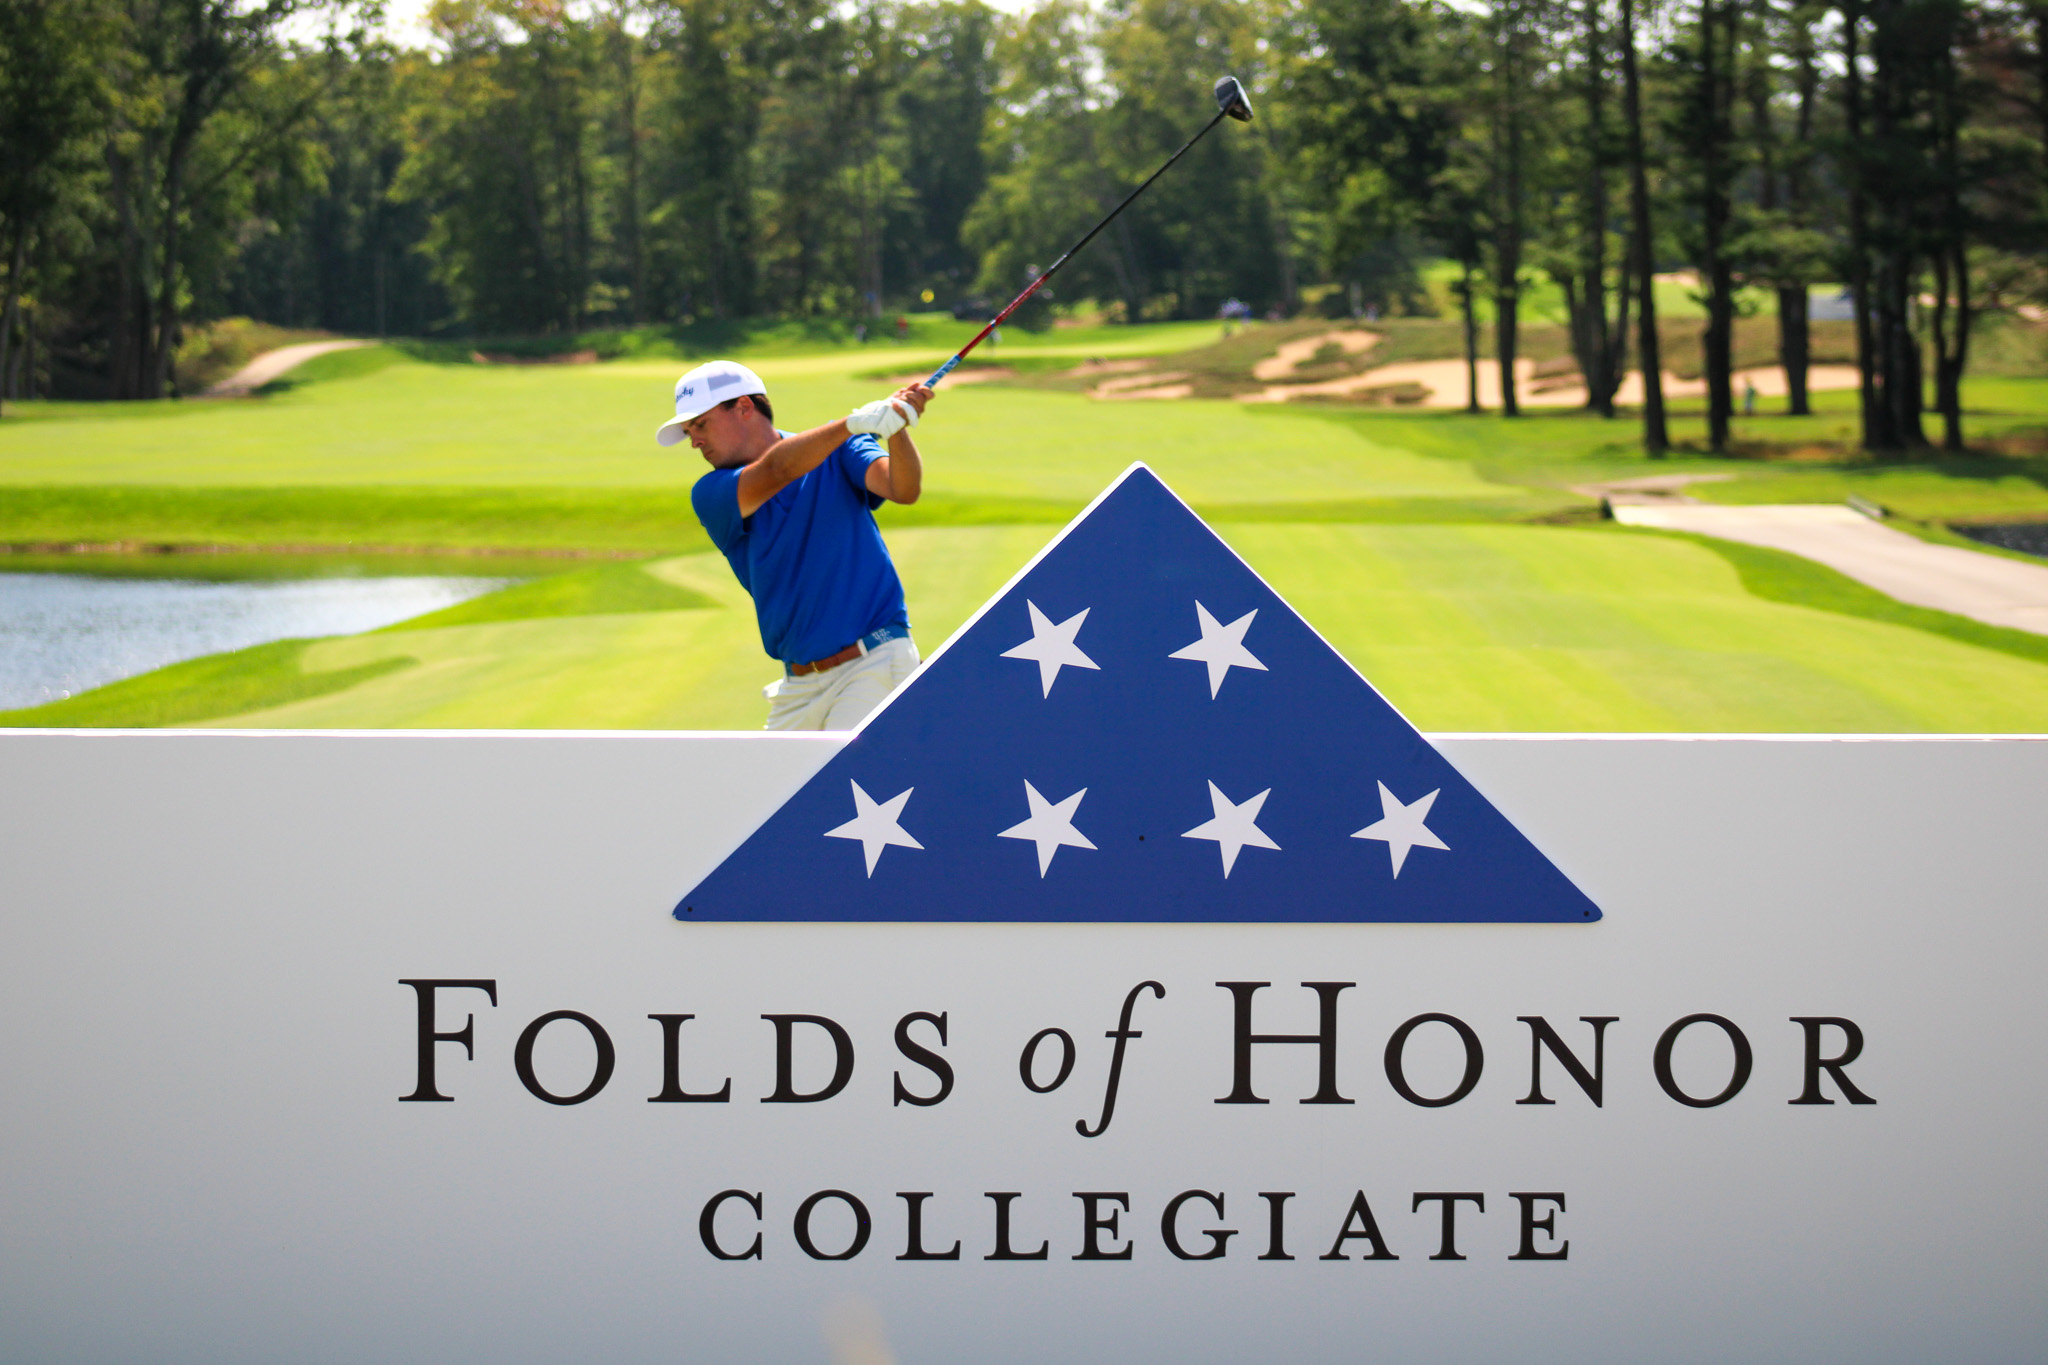 Alex Goff Ties for Second, Campbell Kremer 16th as Cats Tie for Sixth at Folds of Honor